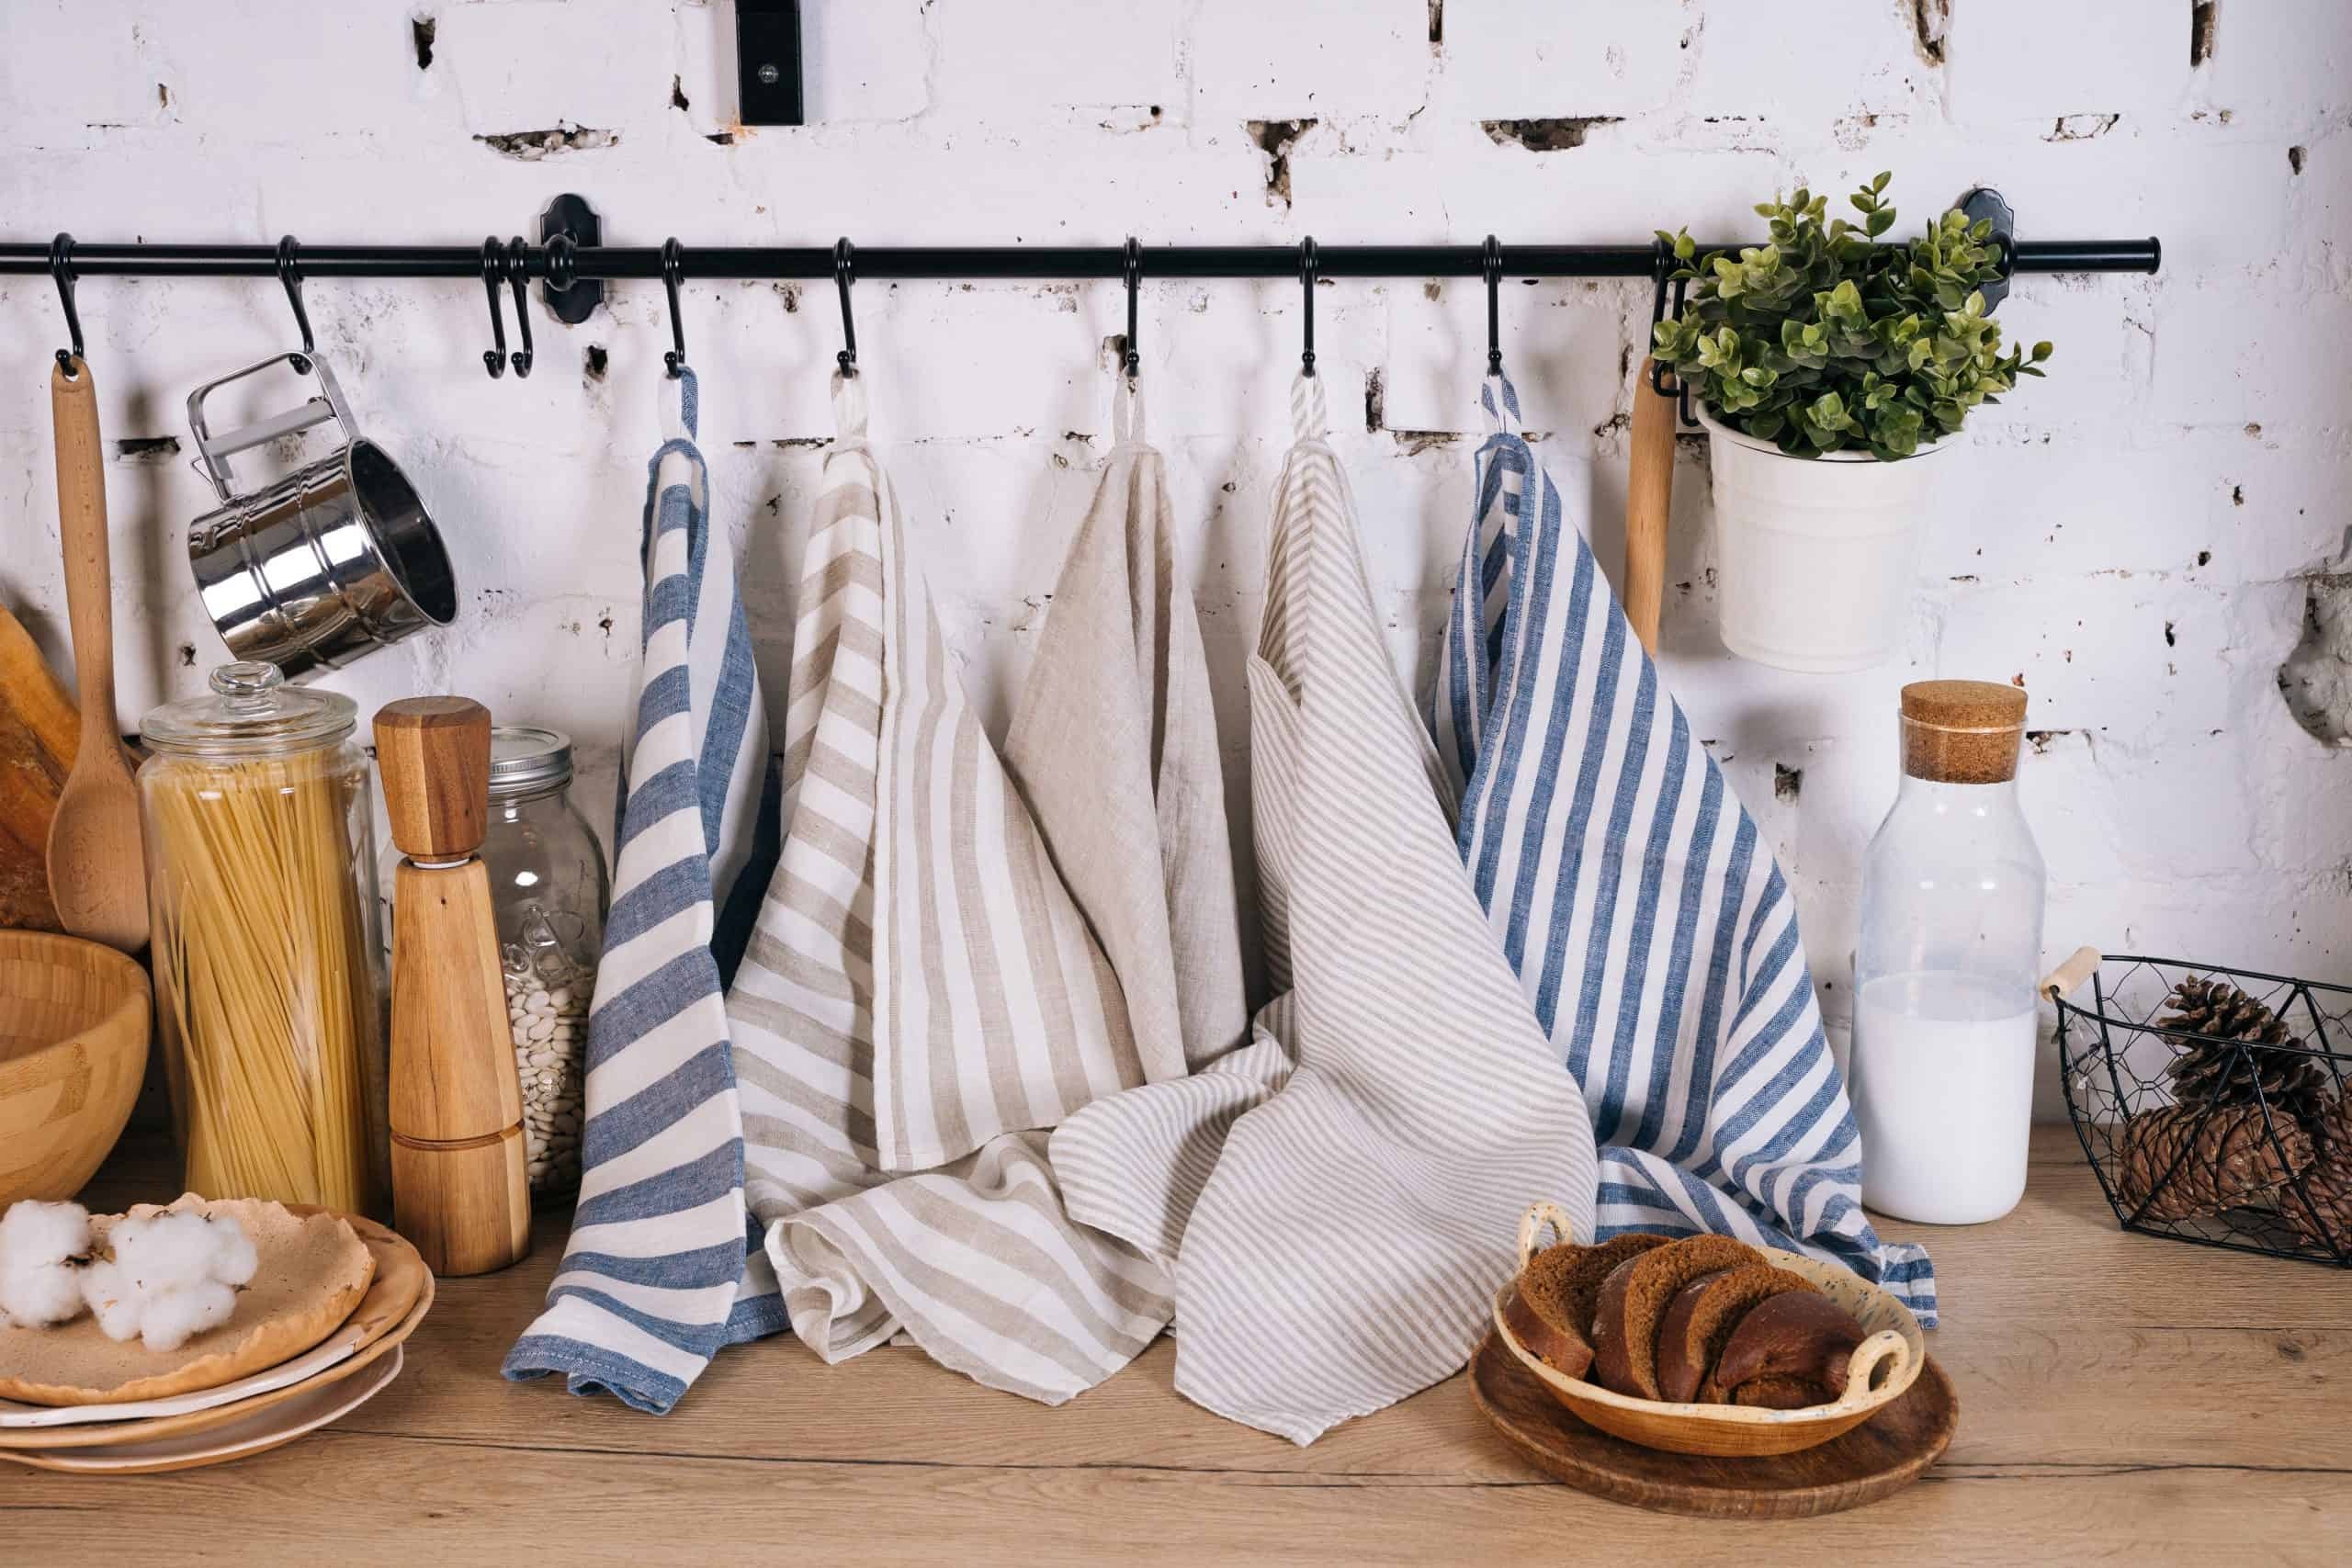 DIY Tea Towel Fabric: How to Make Your Own